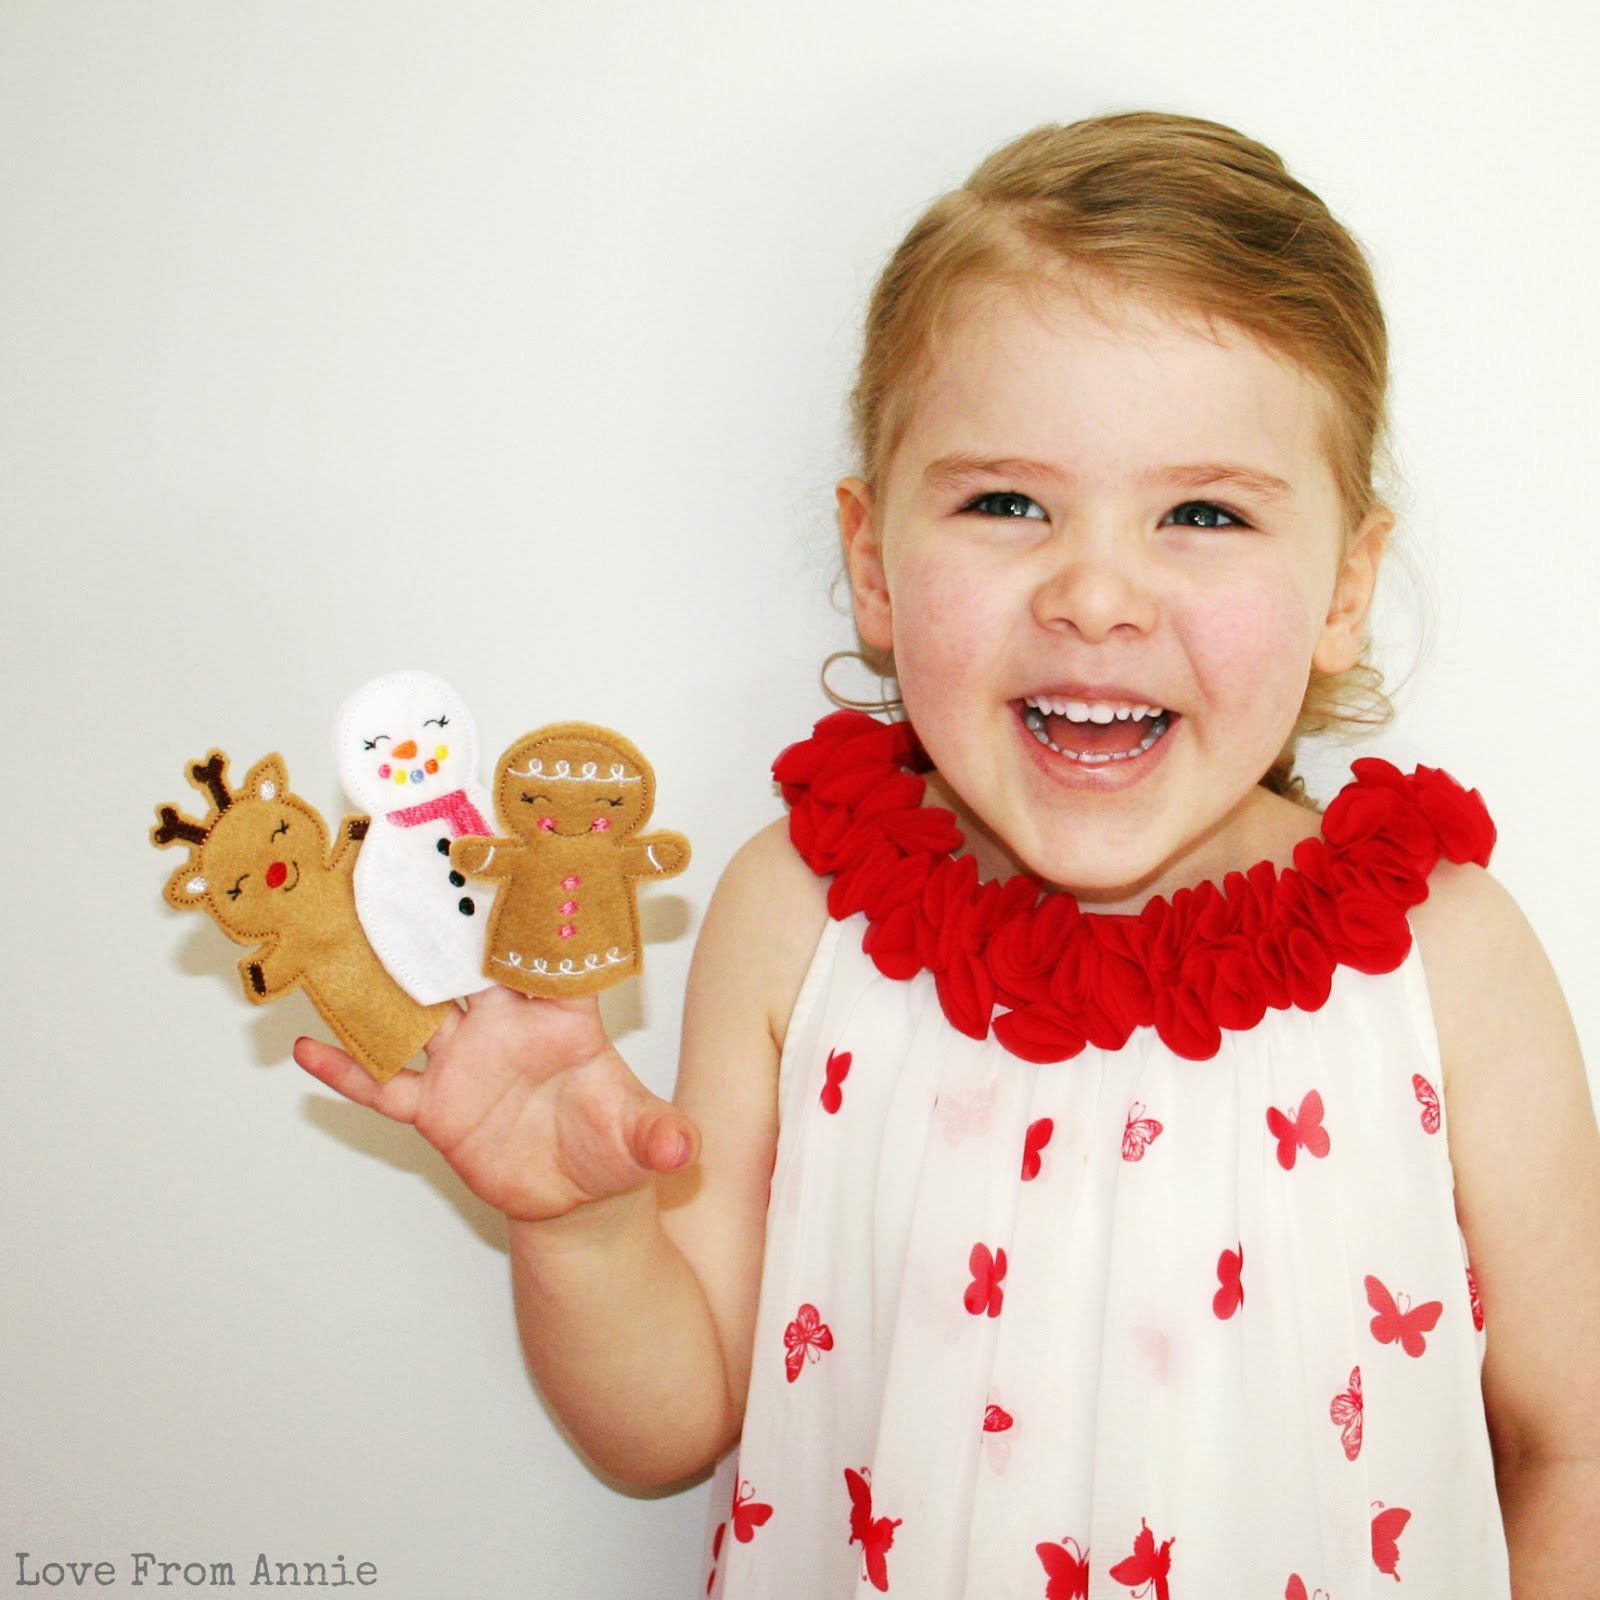 Love From Annie: 3 Months Till Christmas! - Front Page Feature